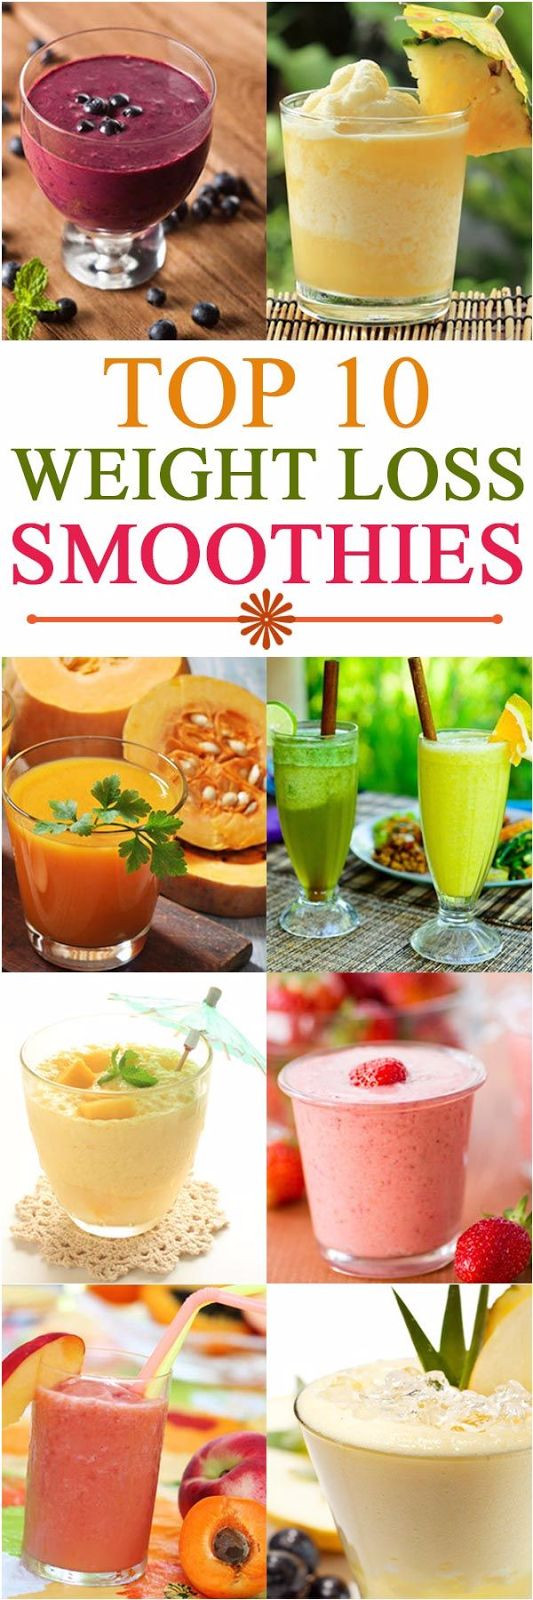 Breakfast Weight Loss Smoothies
 21 Weight Loss Smoothies With Recipes And Benefits